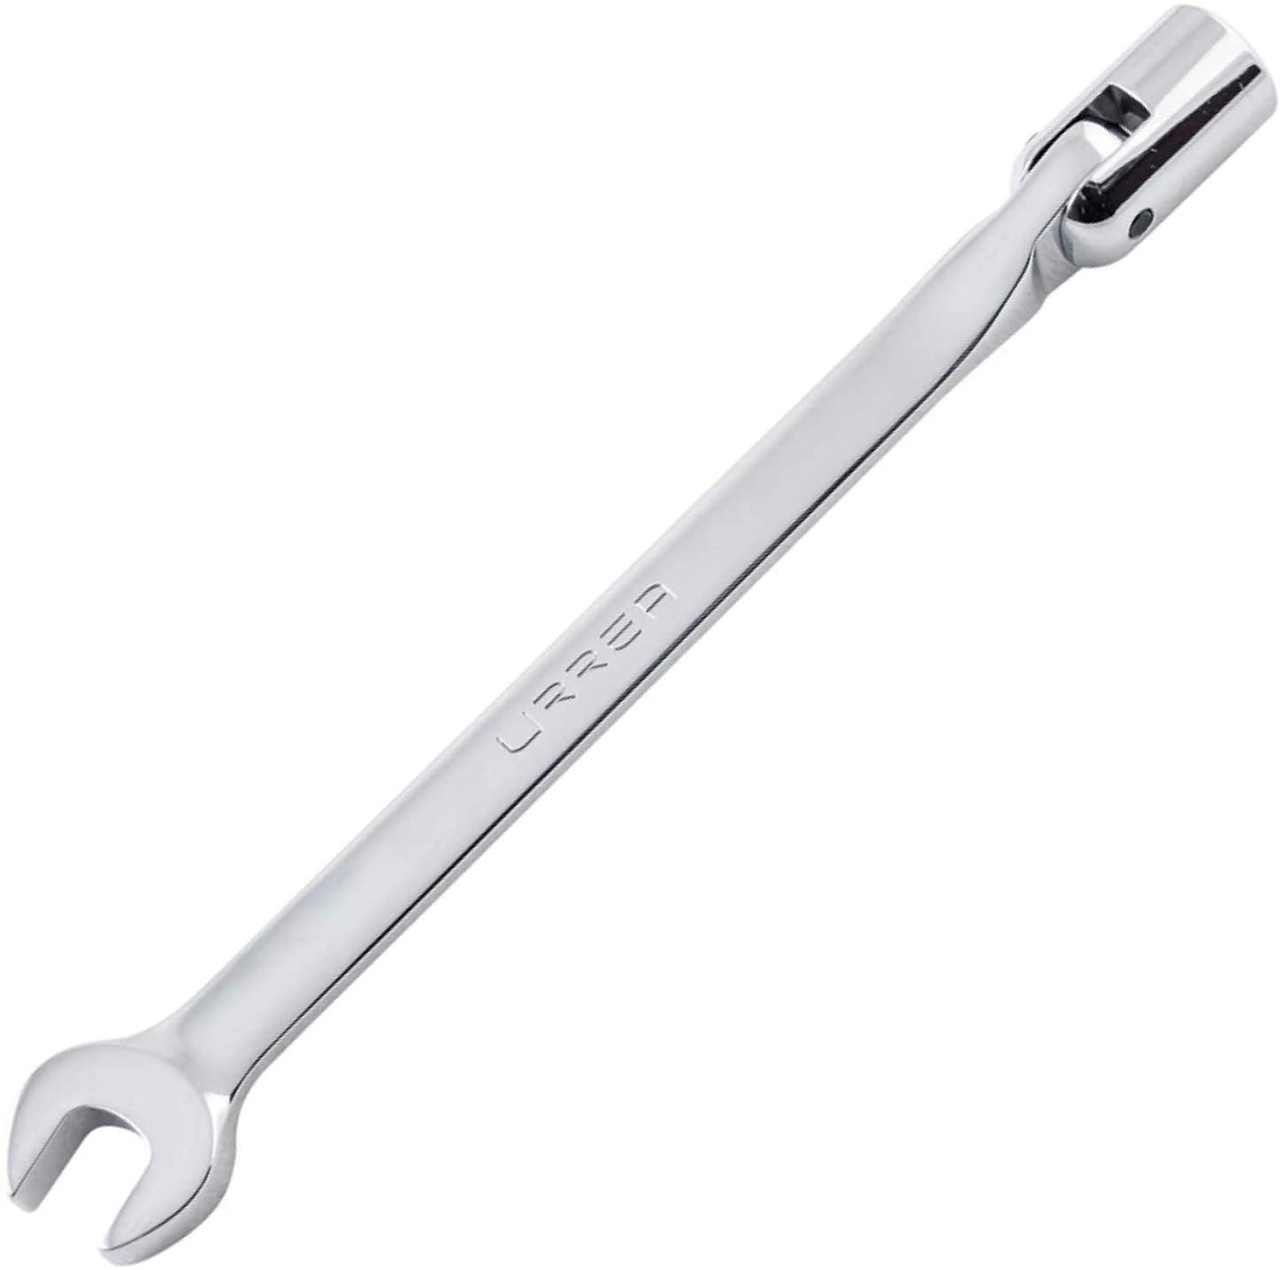 Full Polished flex head wrench, Size: 3/4, 12 point, Total Length: 10"